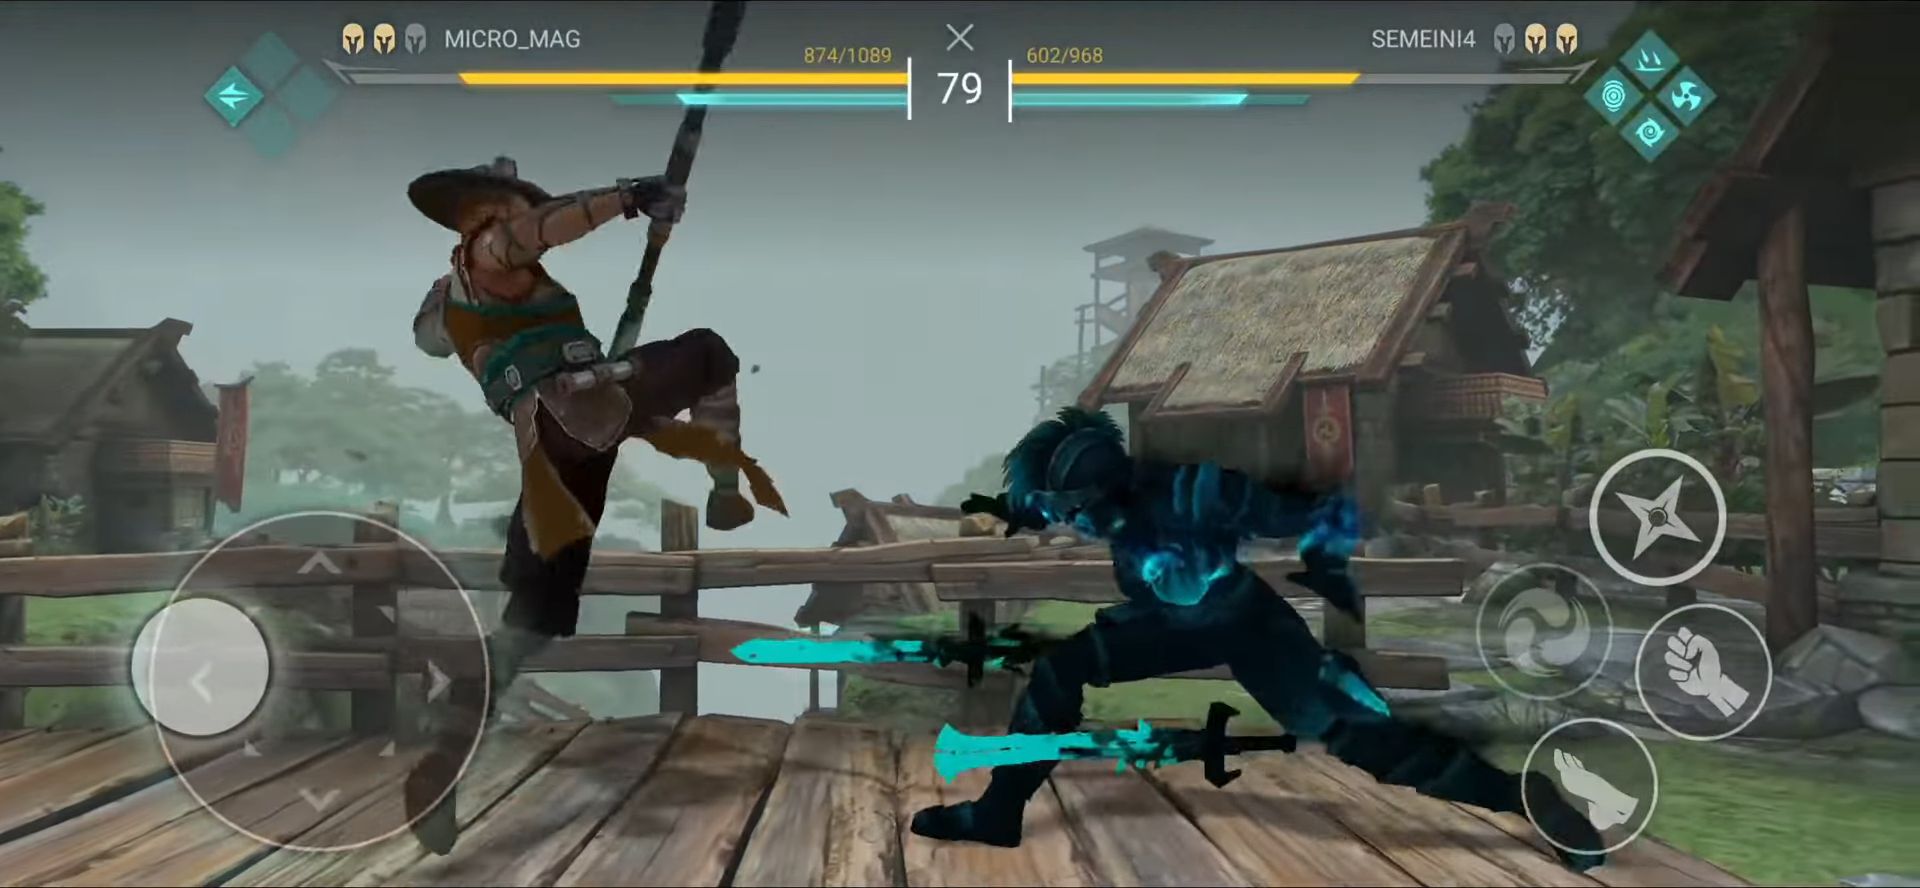 shadow fight 4 pvp arena download free